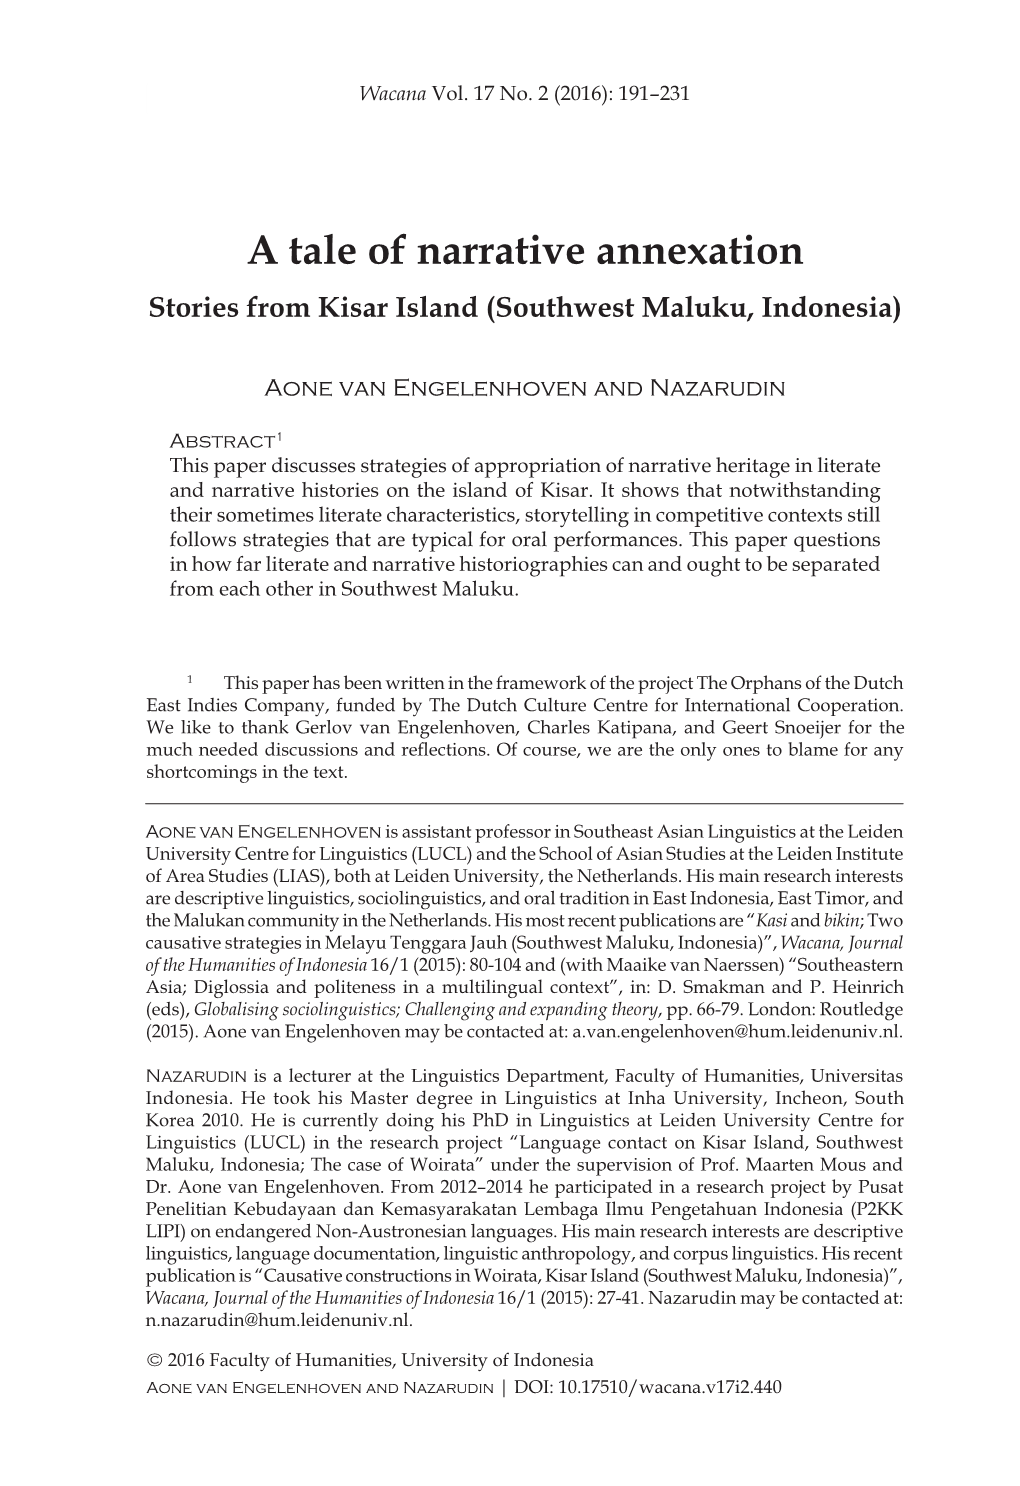 A Tale of Narrative Annexation Stories from Kisar Island (Southwest Maluku, Indonesia)